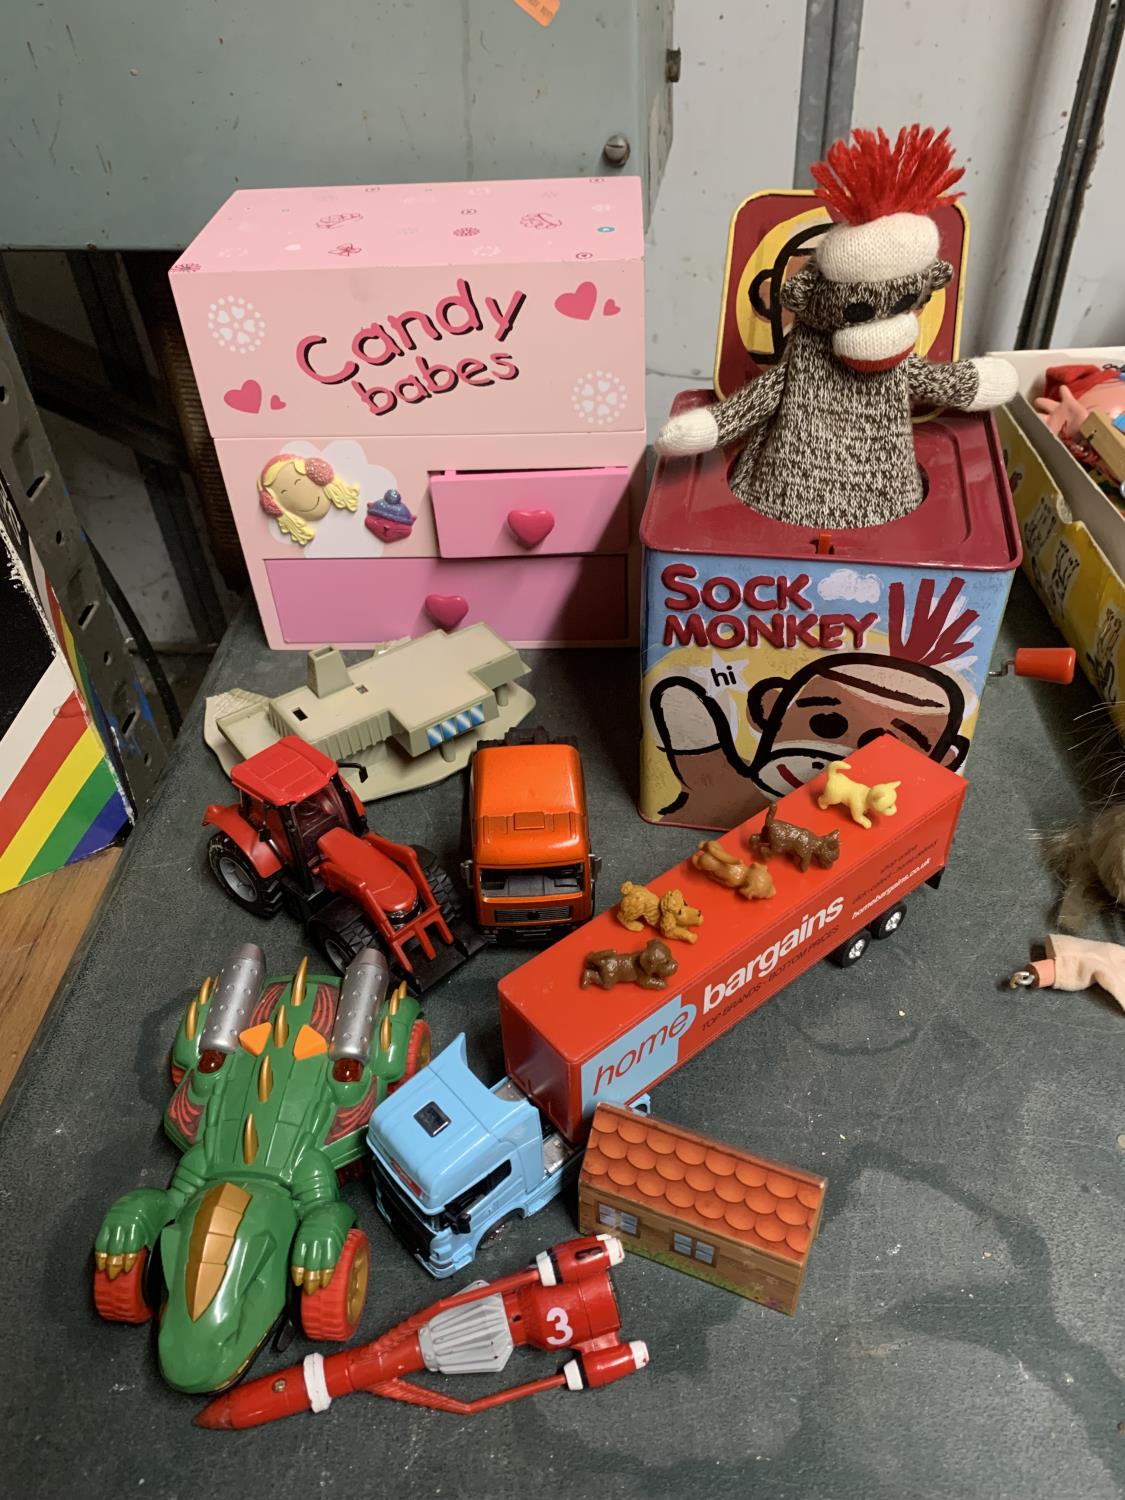 VARIOUS TOYS TO INCLUDE A JACK IN A BOX, VEHICLES, CANDY BABAES CHEST ETC